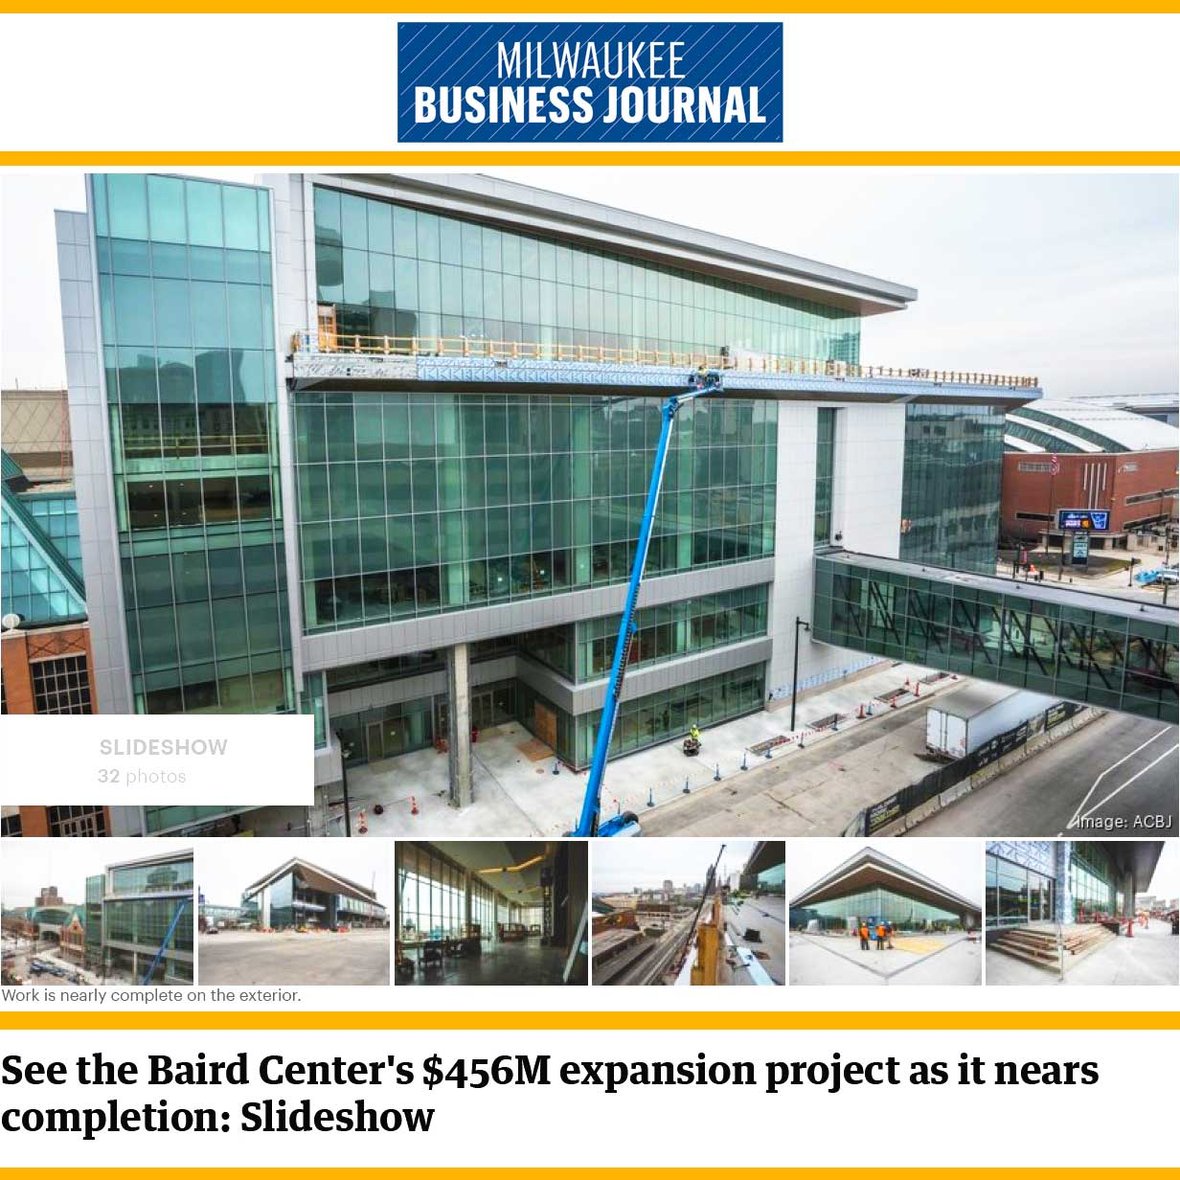 Baird Center Expansion Construction Project photos in Milwaukee Business Journal